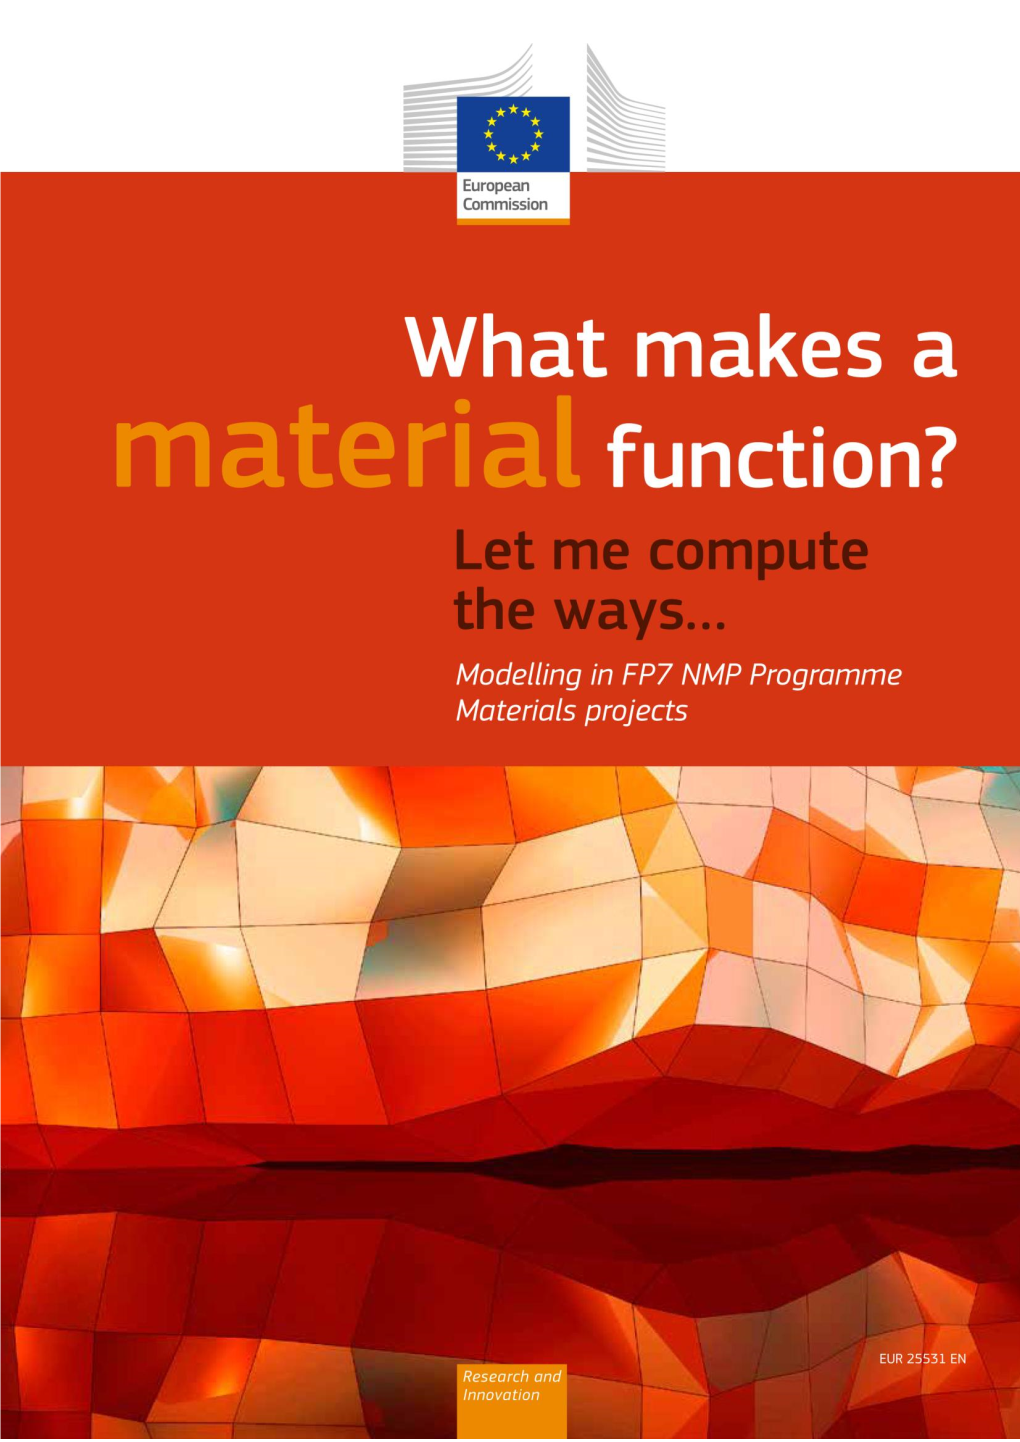 Rolicer Consortium; What Makes a Material Function?